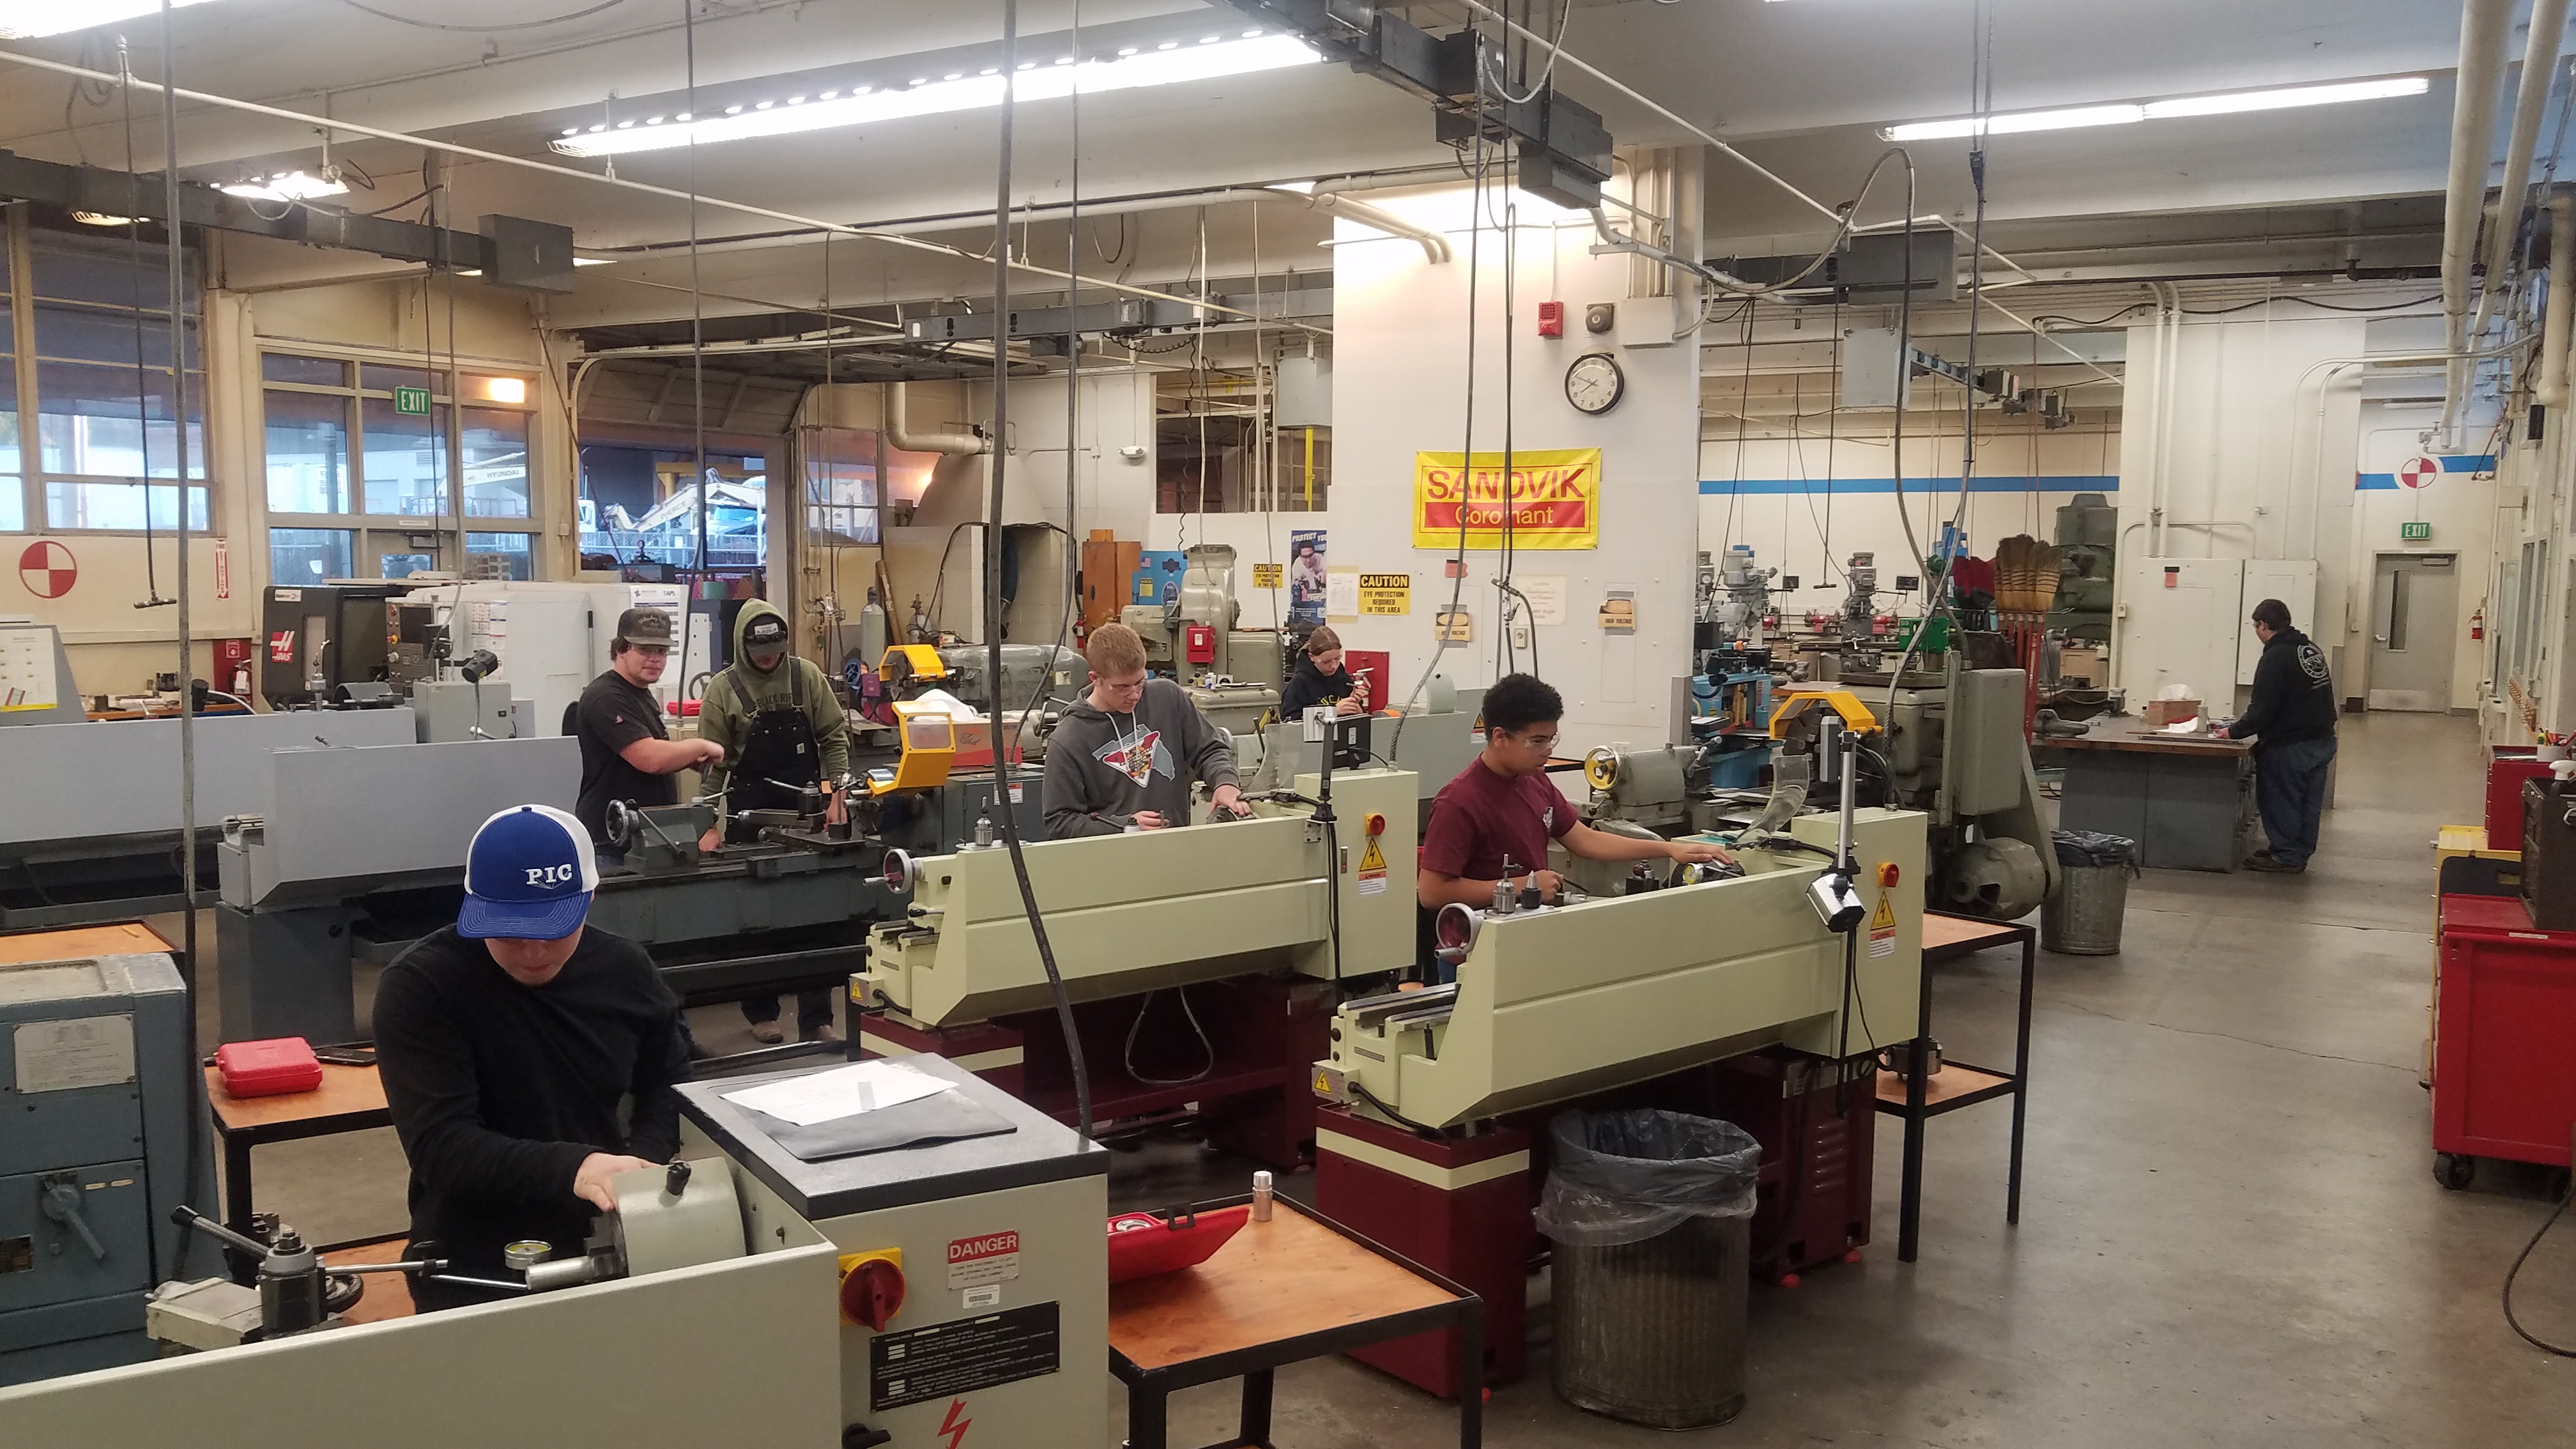 Students using lathes in class